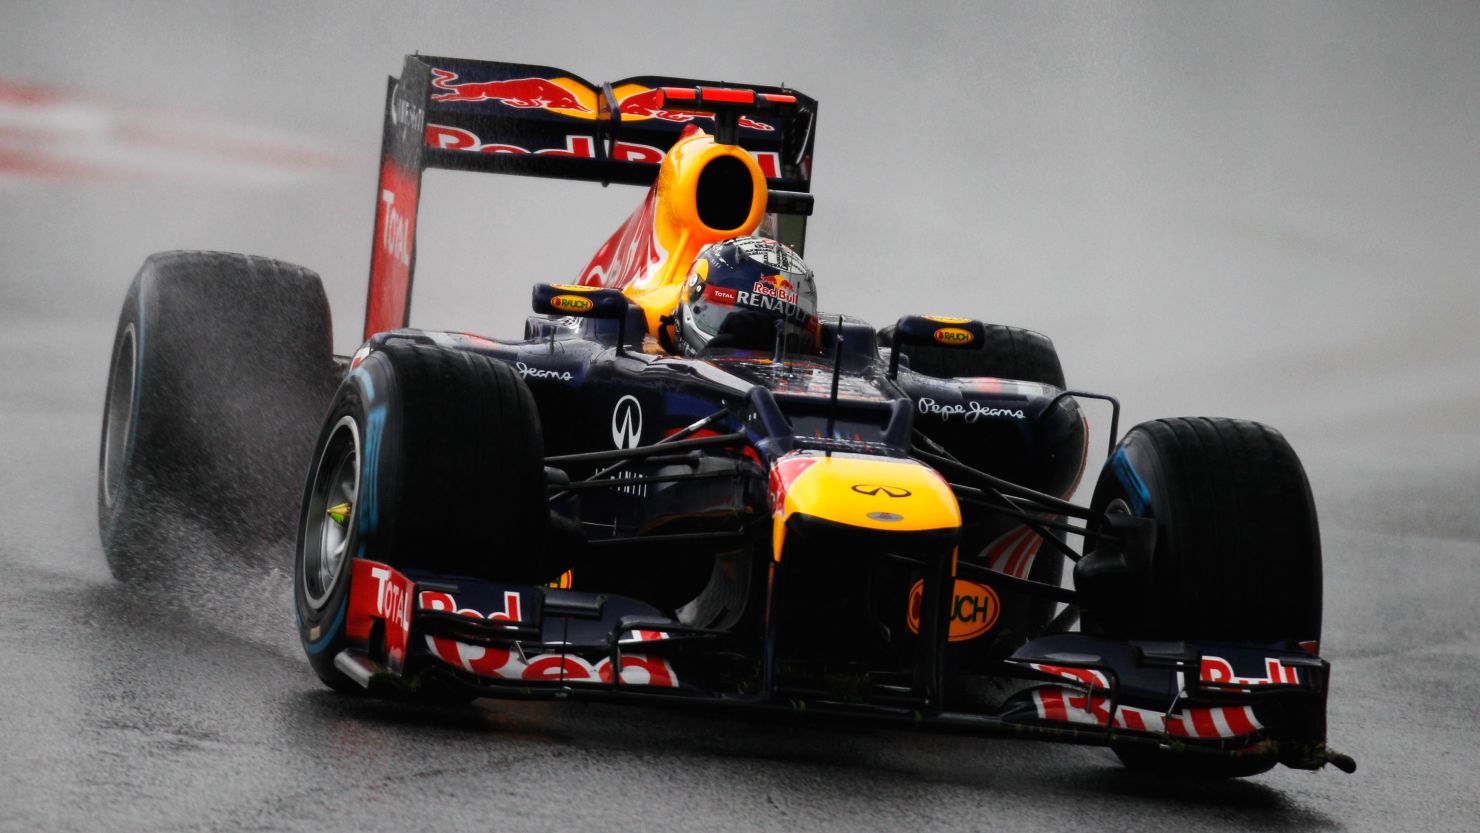 Red Bull's Sebastian Vettel became the youngest double world champion in Formula One's history with his triumph last season.